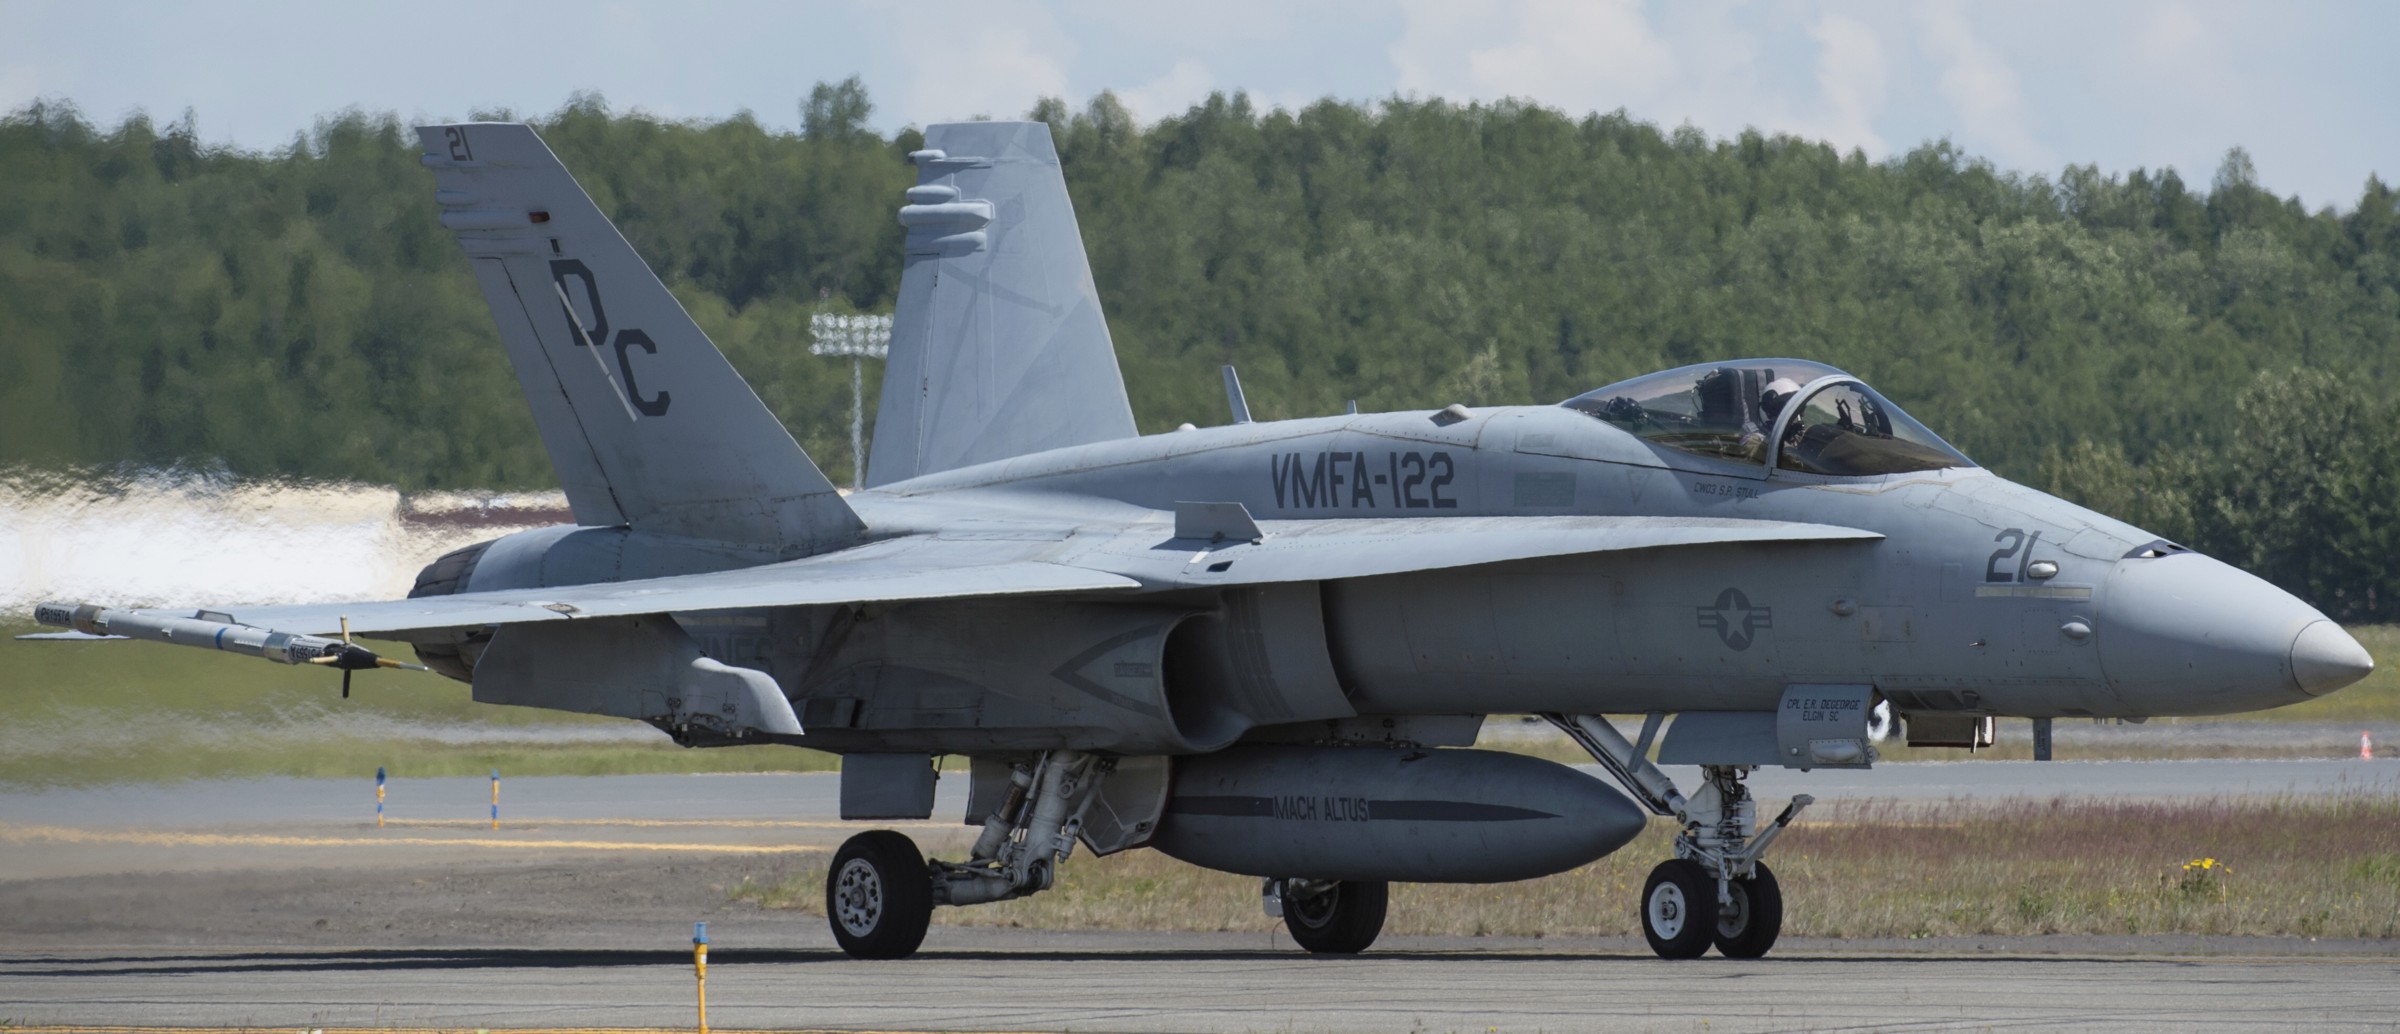 vmfa-122 flying leathernecks f/a-18c hornet marine fighter attack squadron 79